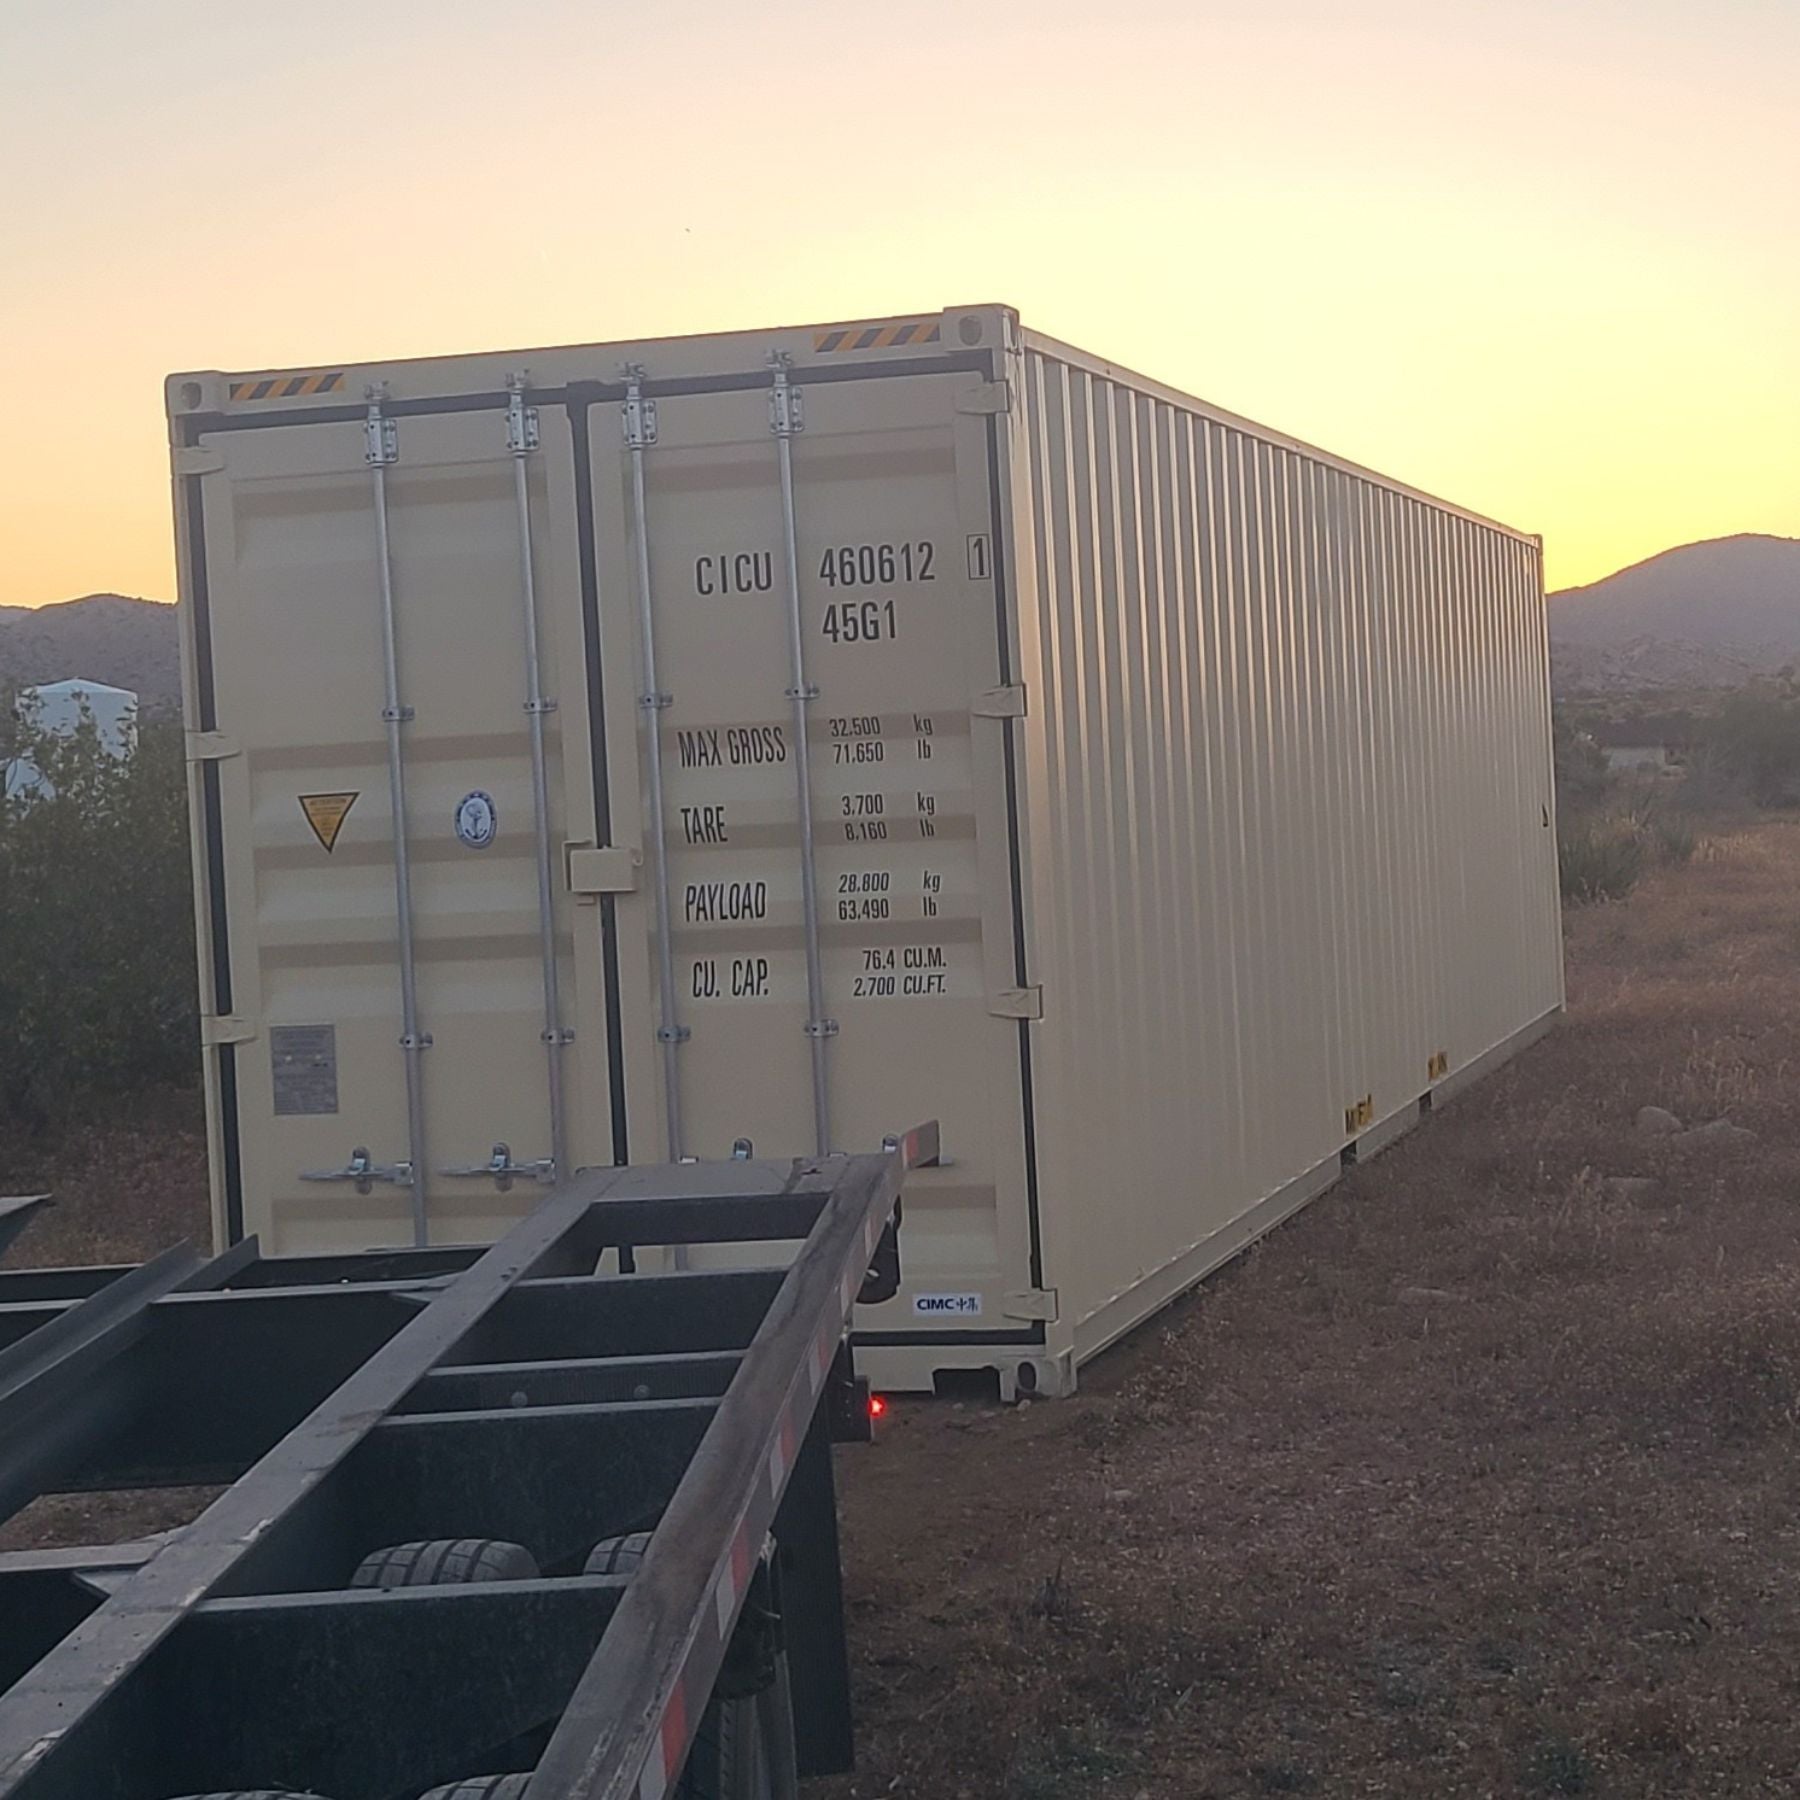 Shipping Container For Barn & Tack Storage